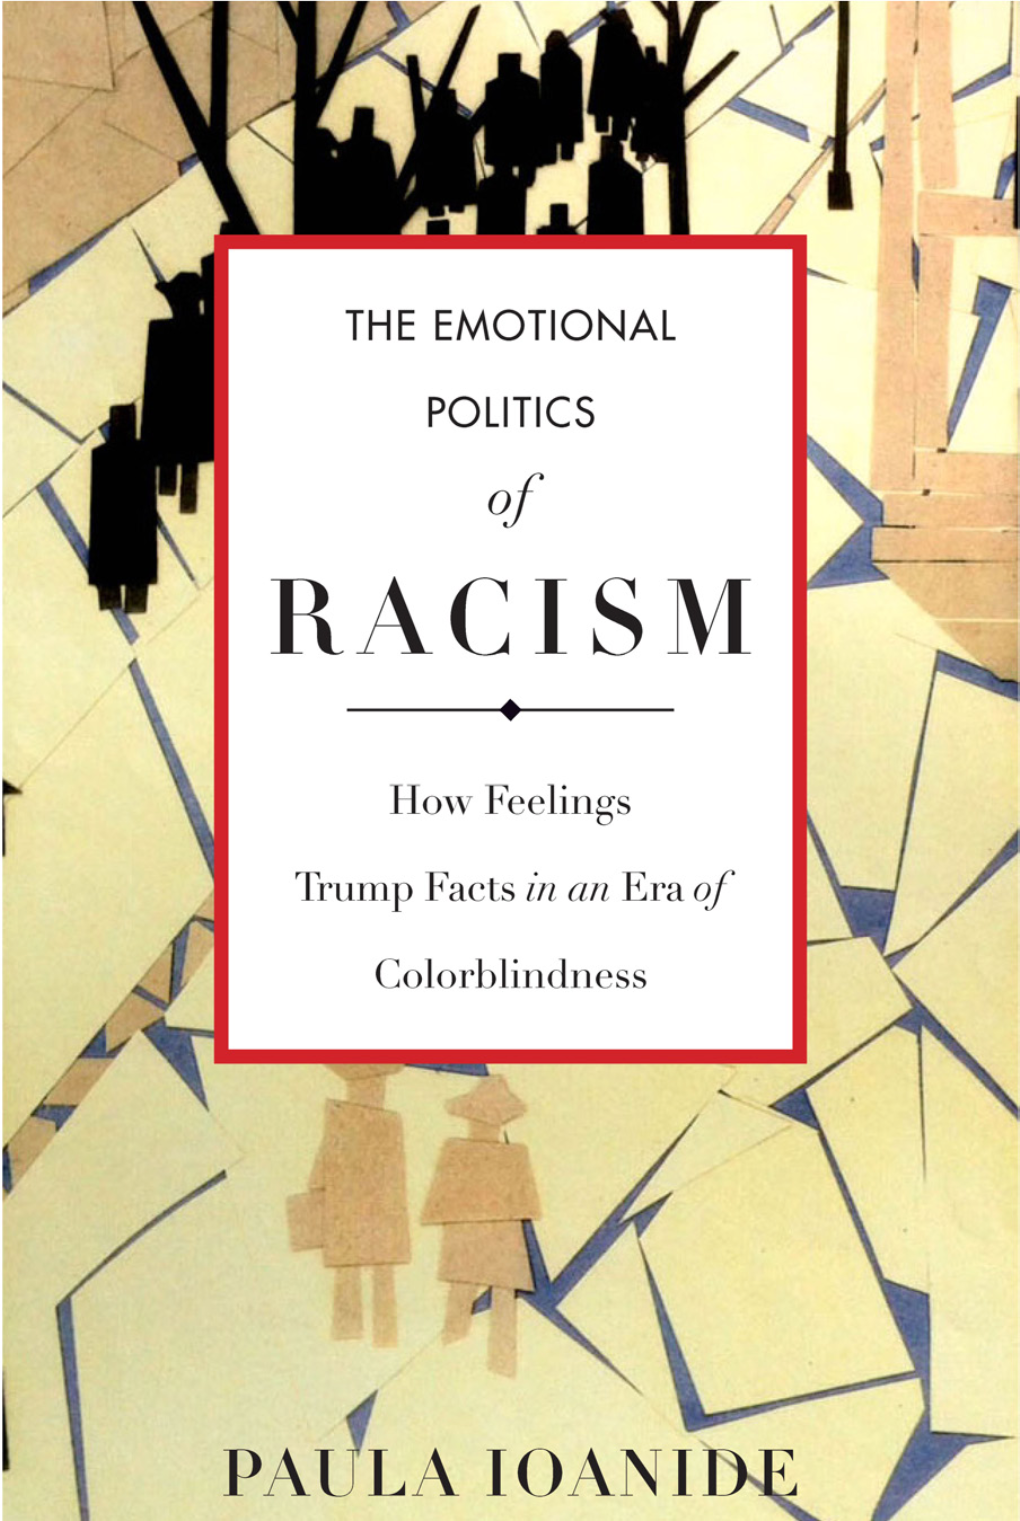 THE EMOTIONAL POLITICS of RACISM Stanford Studies in COMPARATIVE RACE and ETHNICITY the EMOTIONAL POLITICS of RACISM